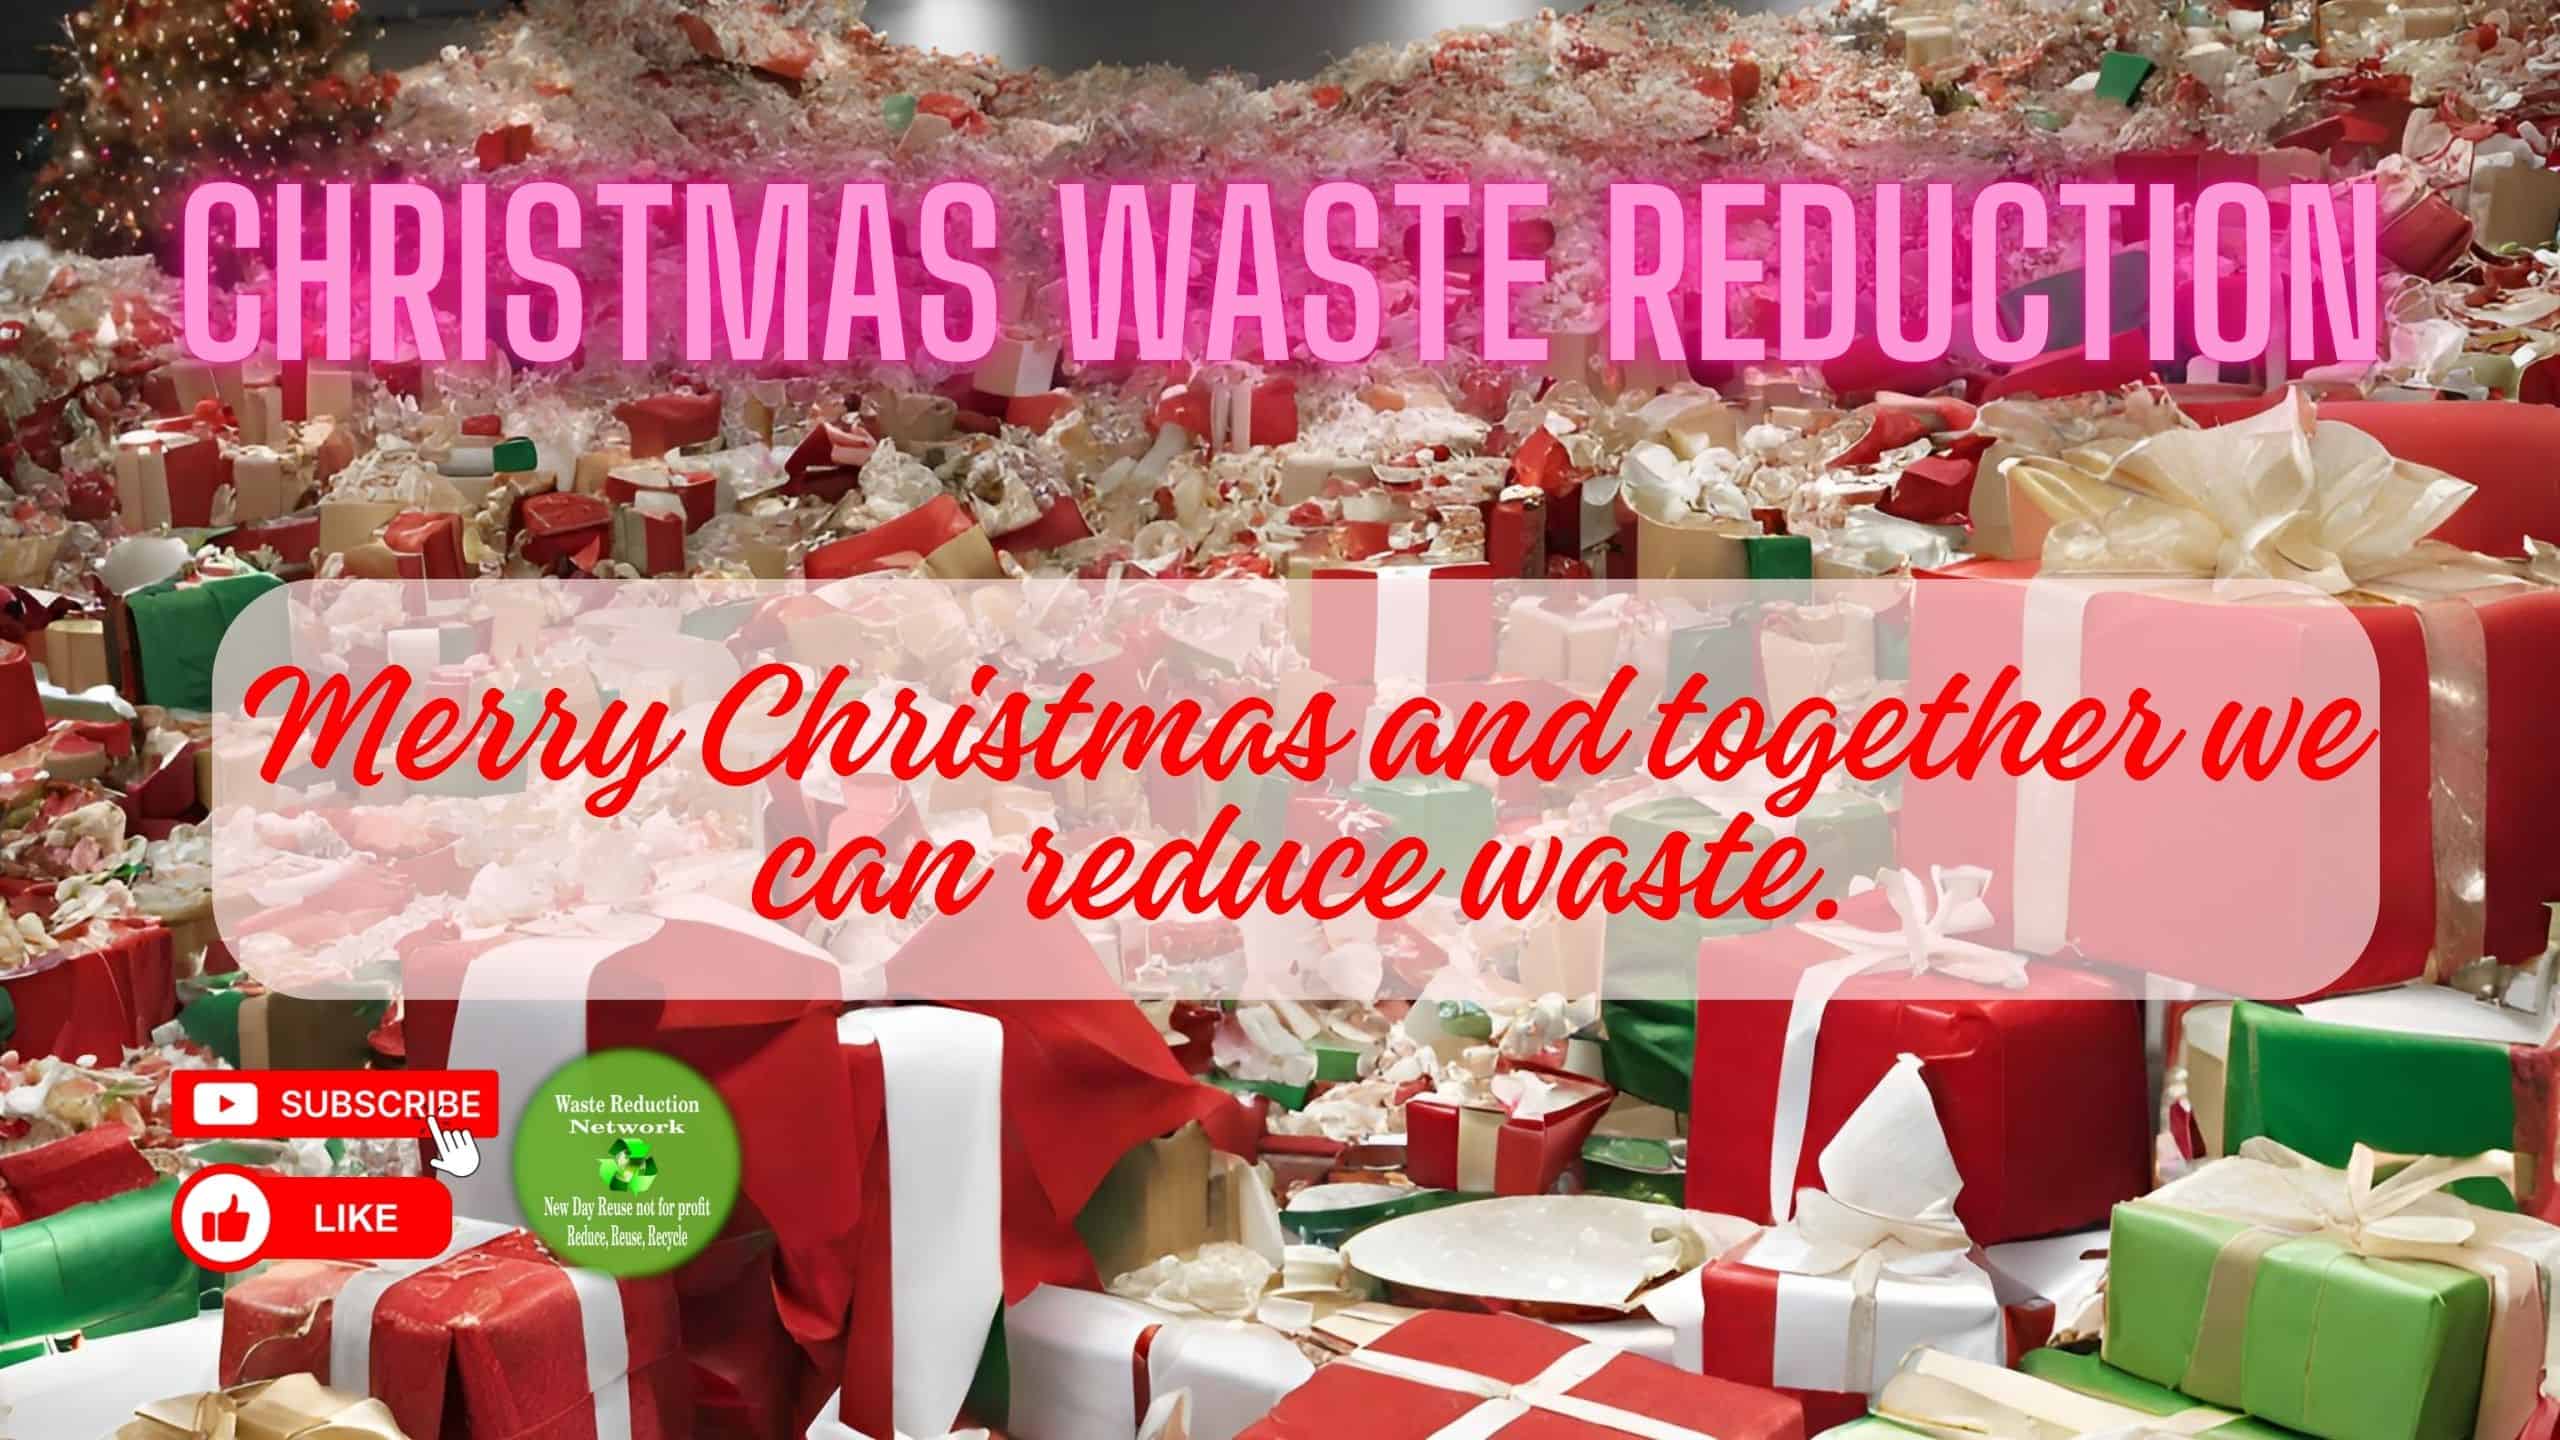 Waste created by Christmas gifts and parties. Waste Reduction Network / New Day Reuse 501 C 3